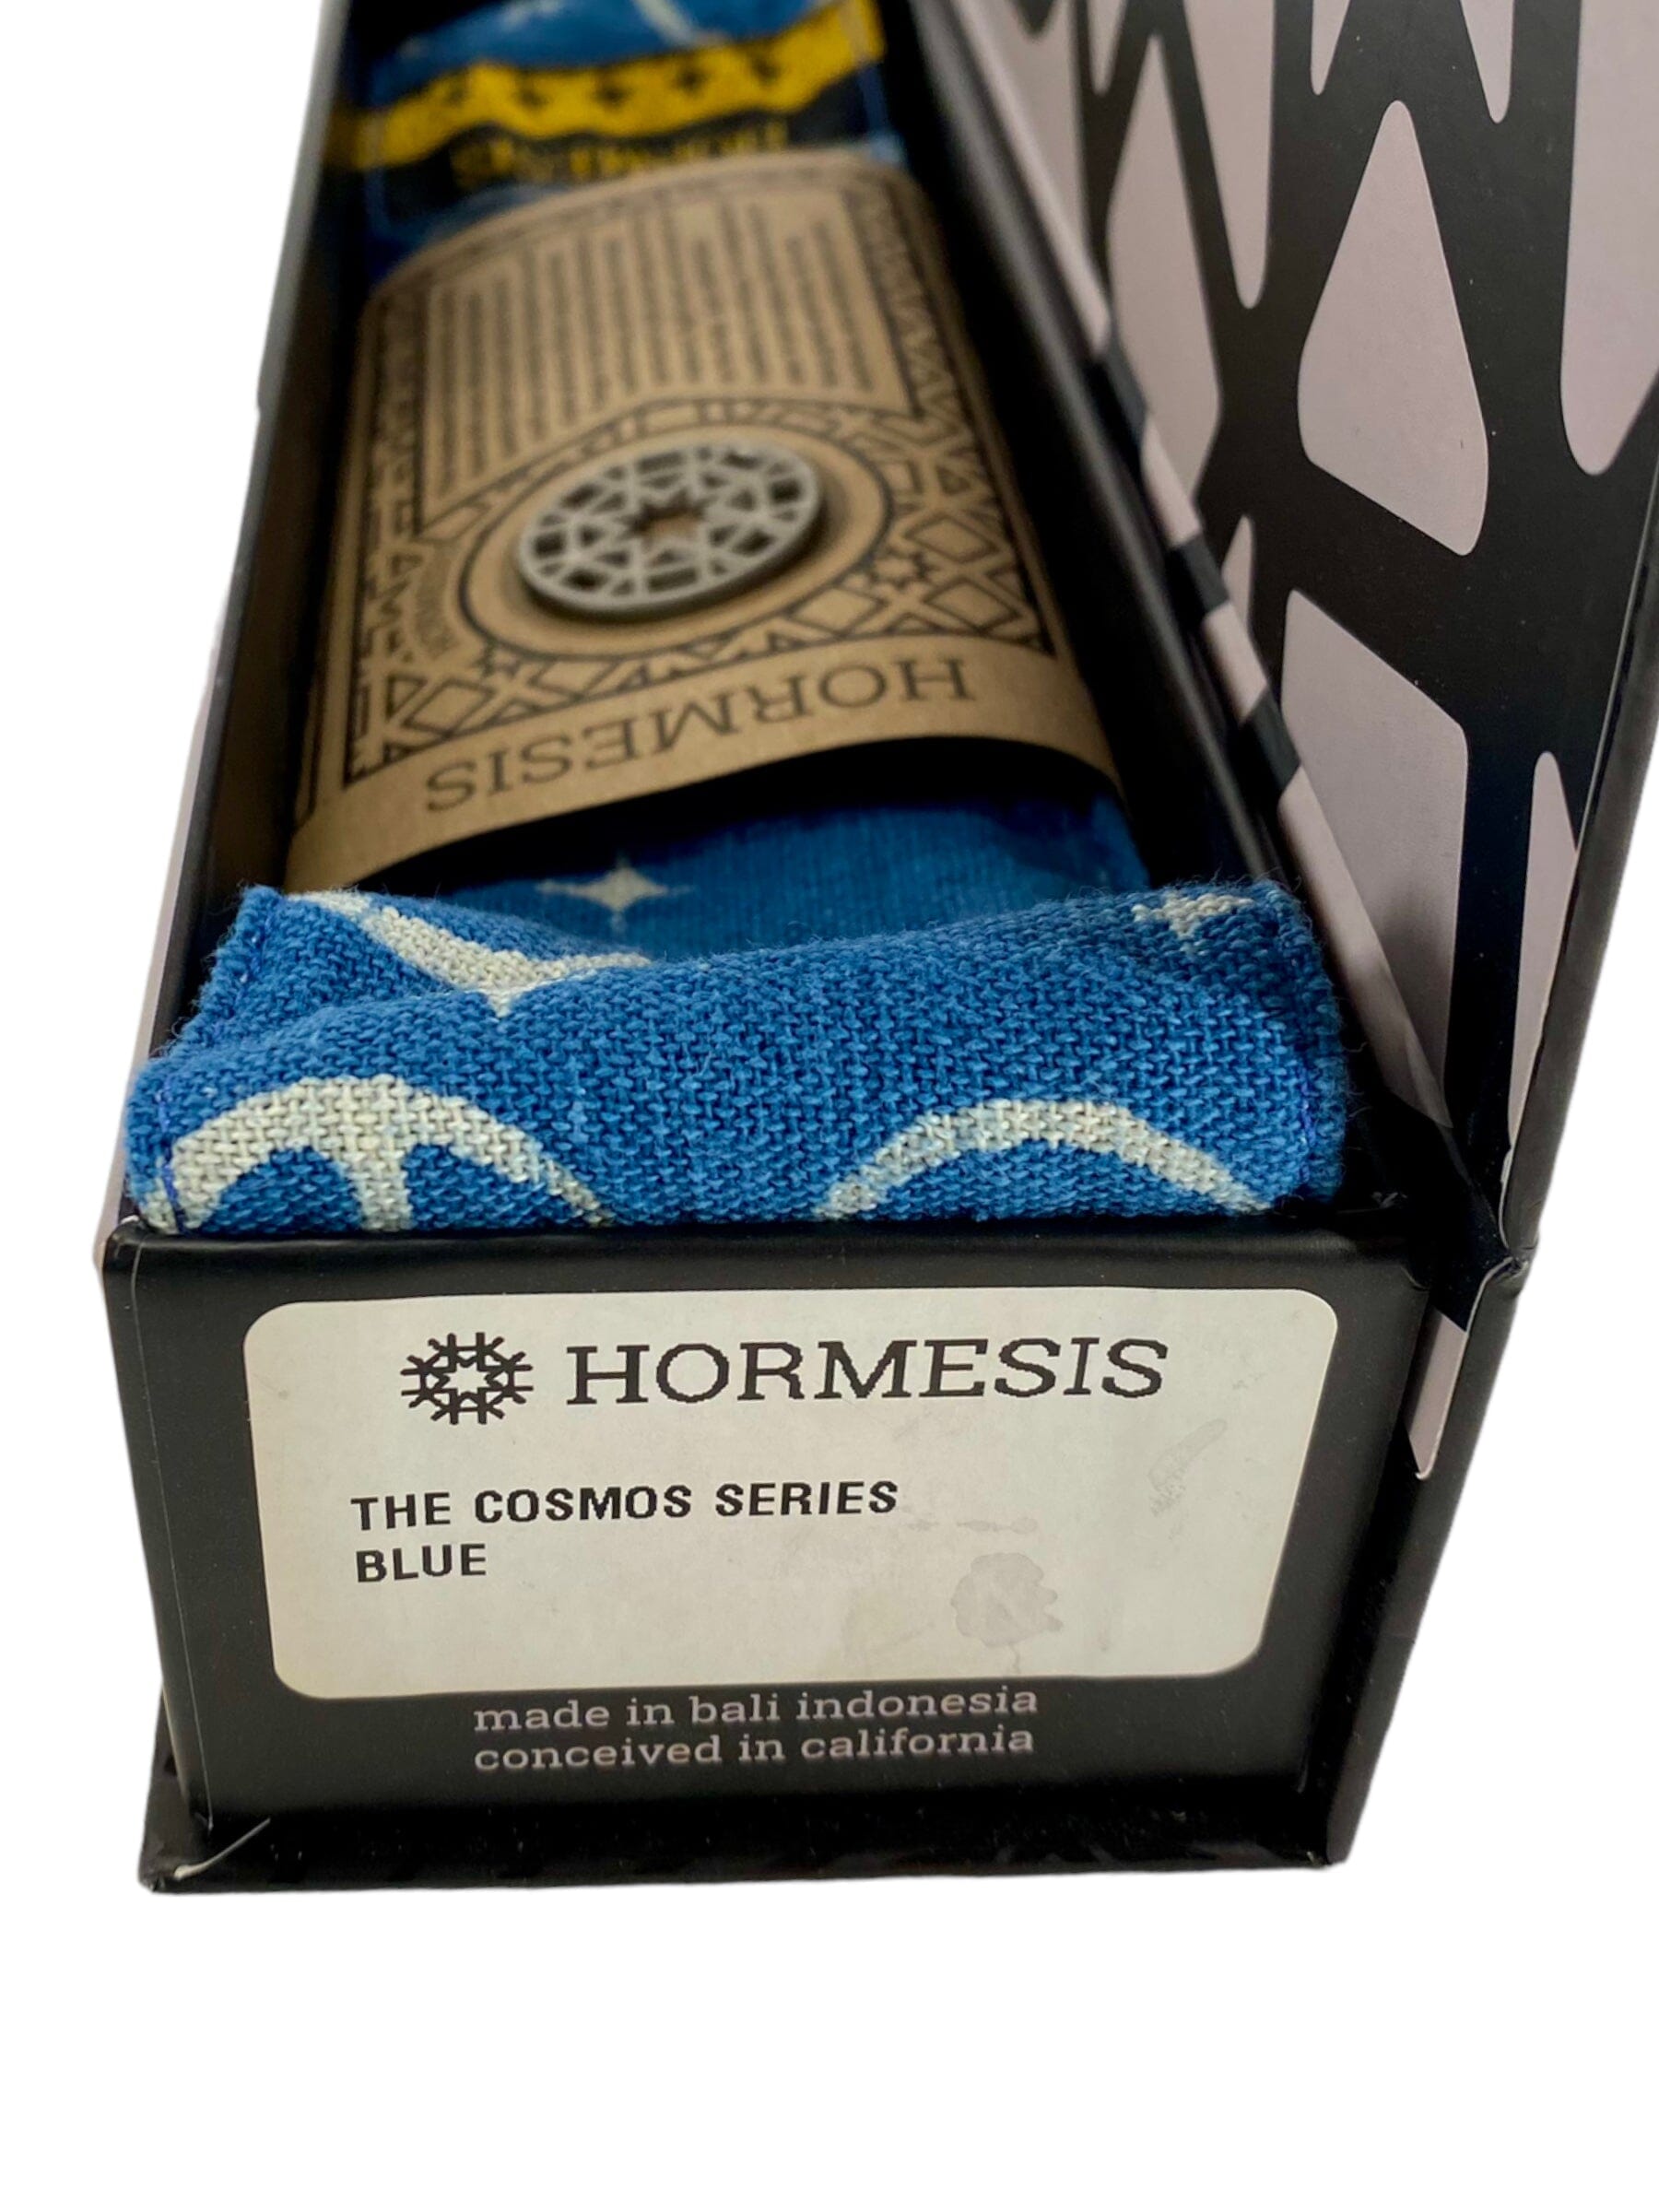 Used Hormesis Headband The Cosmos Series-Blue Paintball Gun from CPXBrosPaintball Buy/Sell/Trade Paintball Markers, Paintball Hoppers, Paintball Masks, and Hormesis Headbands